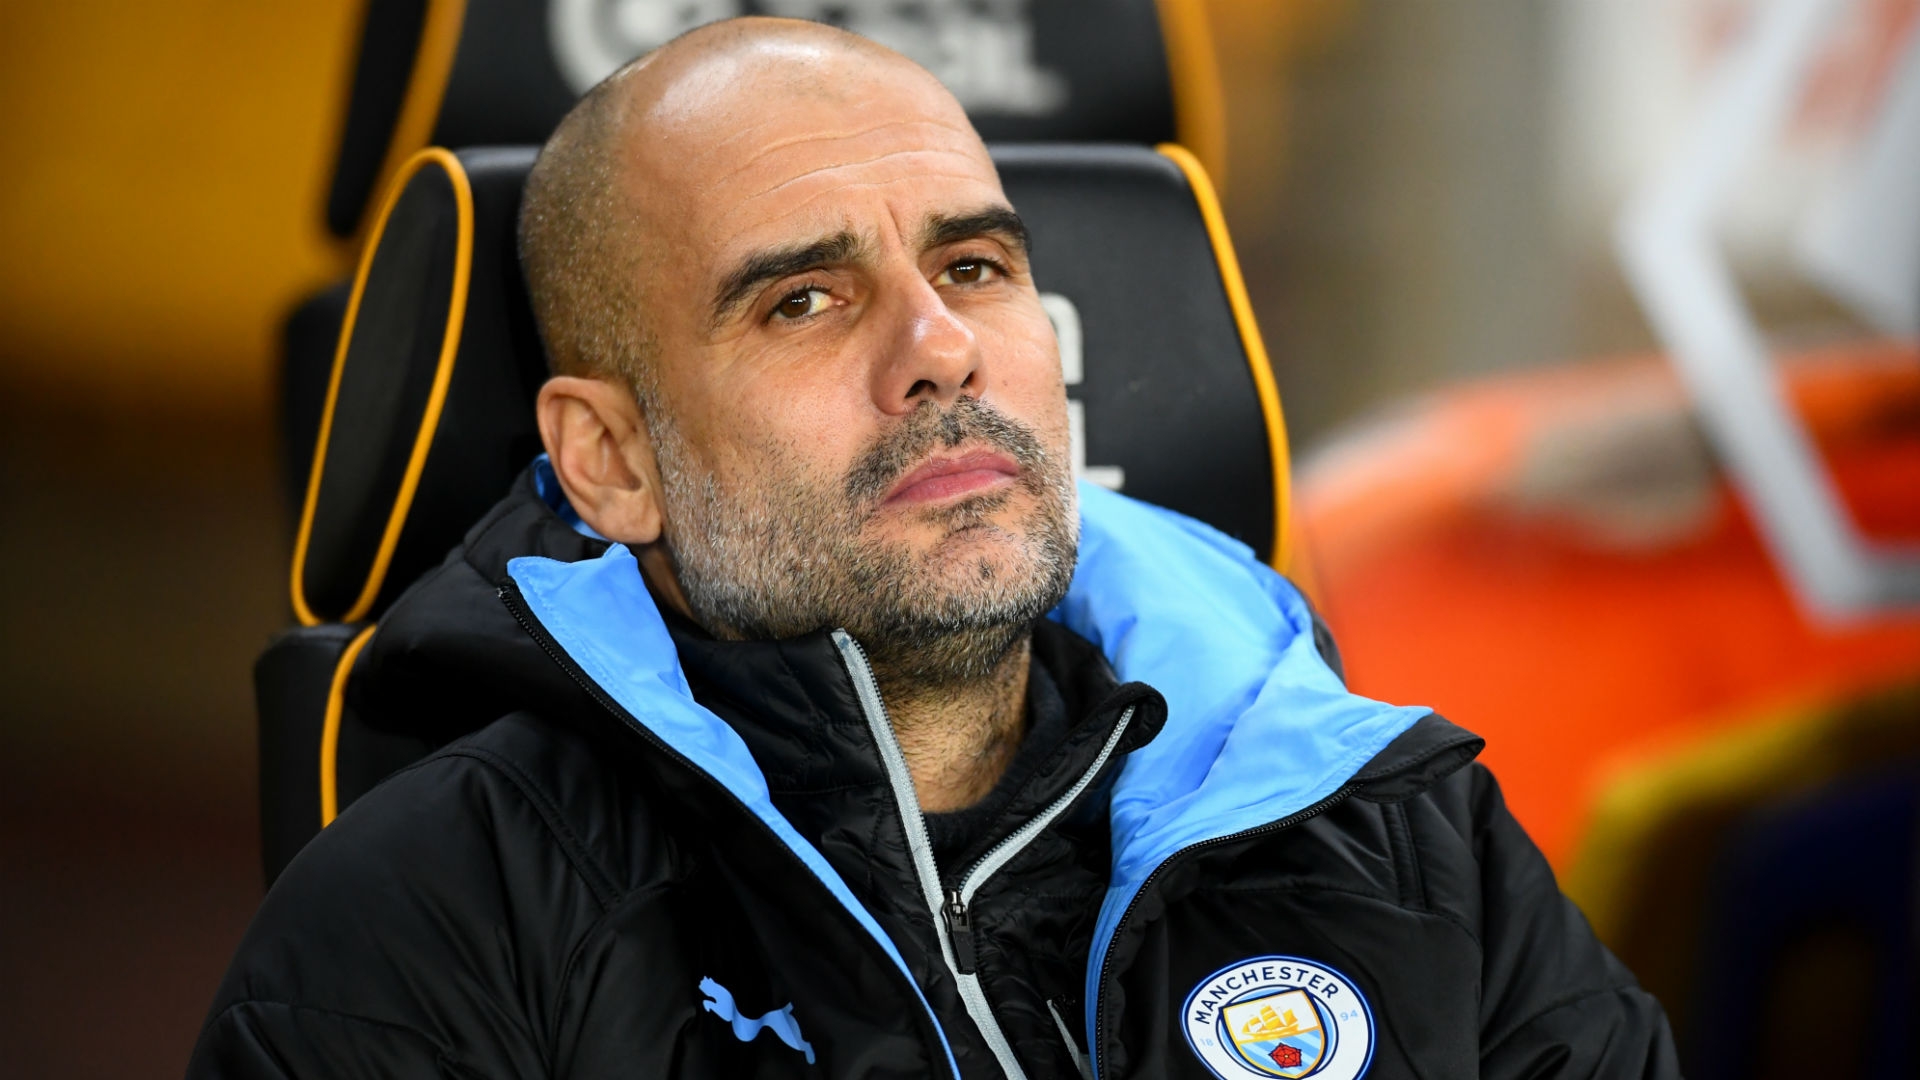 Manchester City’s New Manager to Be Announced This Summer